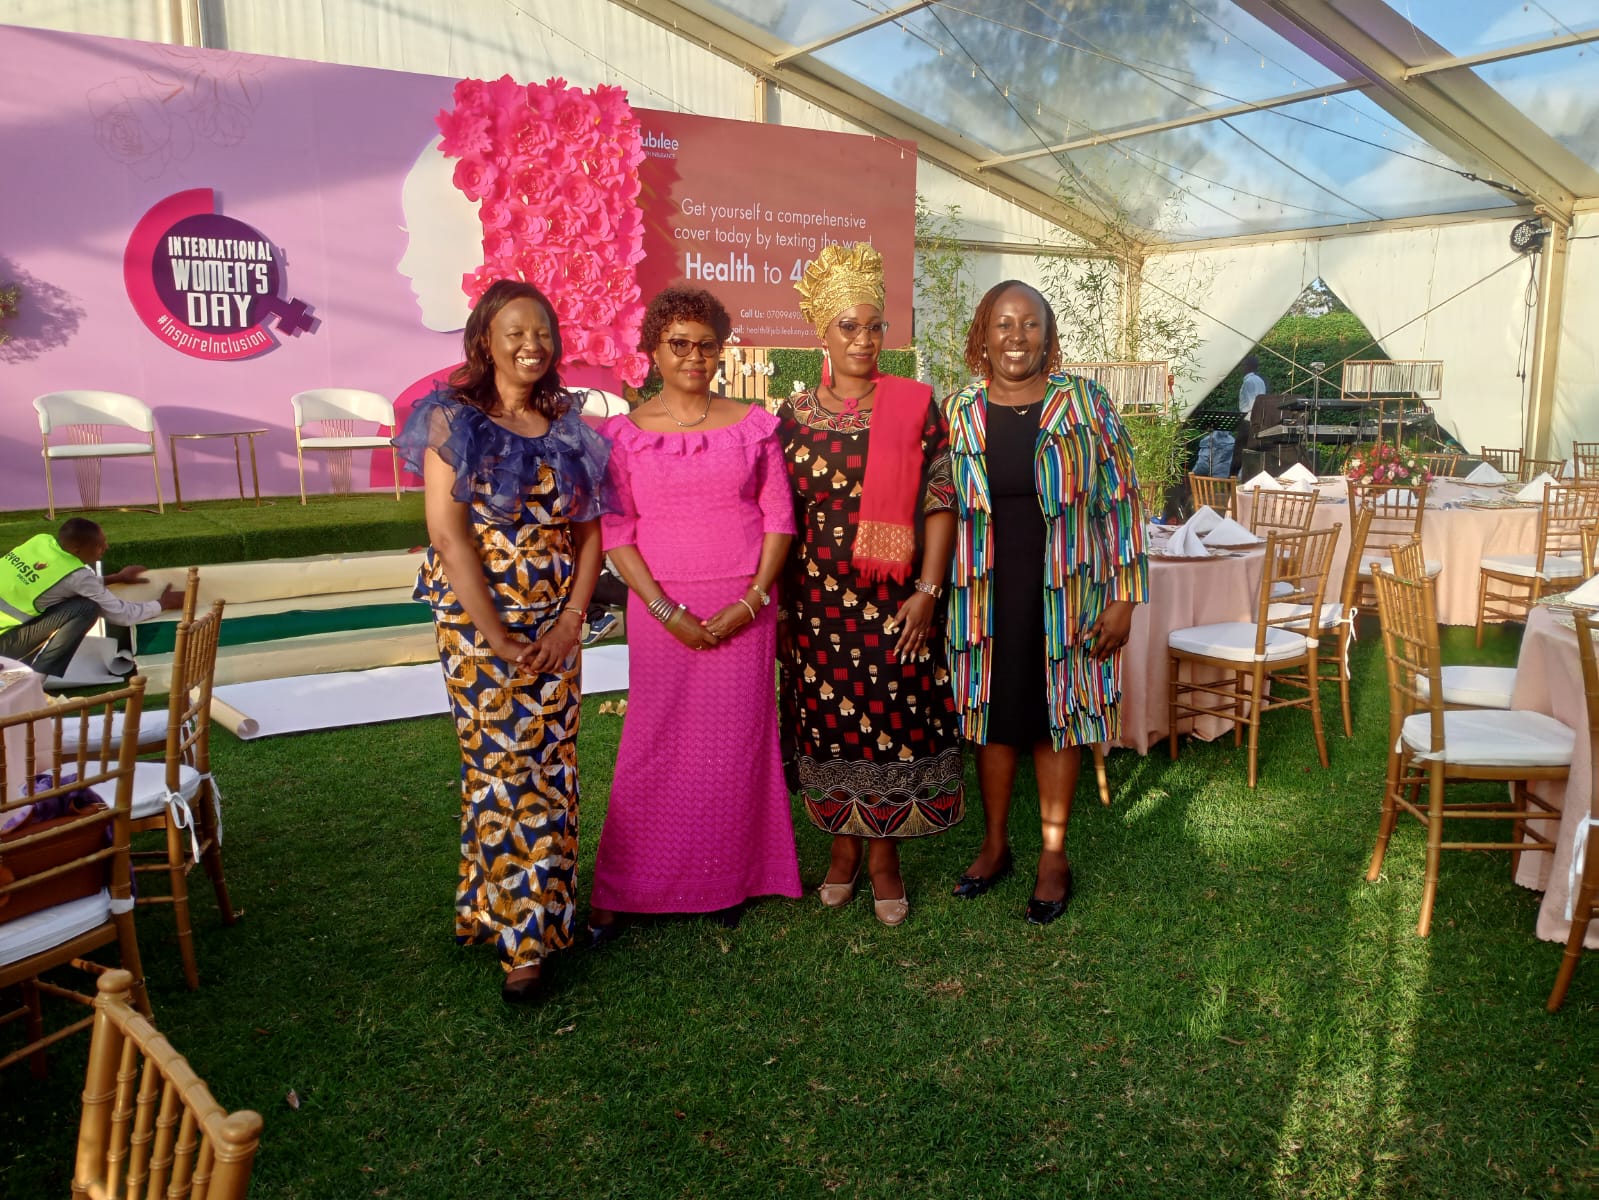 KENYA RE SPONSORS INTERNATIONAL WOMEN’S DAY EVENT IN PARTNERSHIP WITH NATION MEDIA GROUP